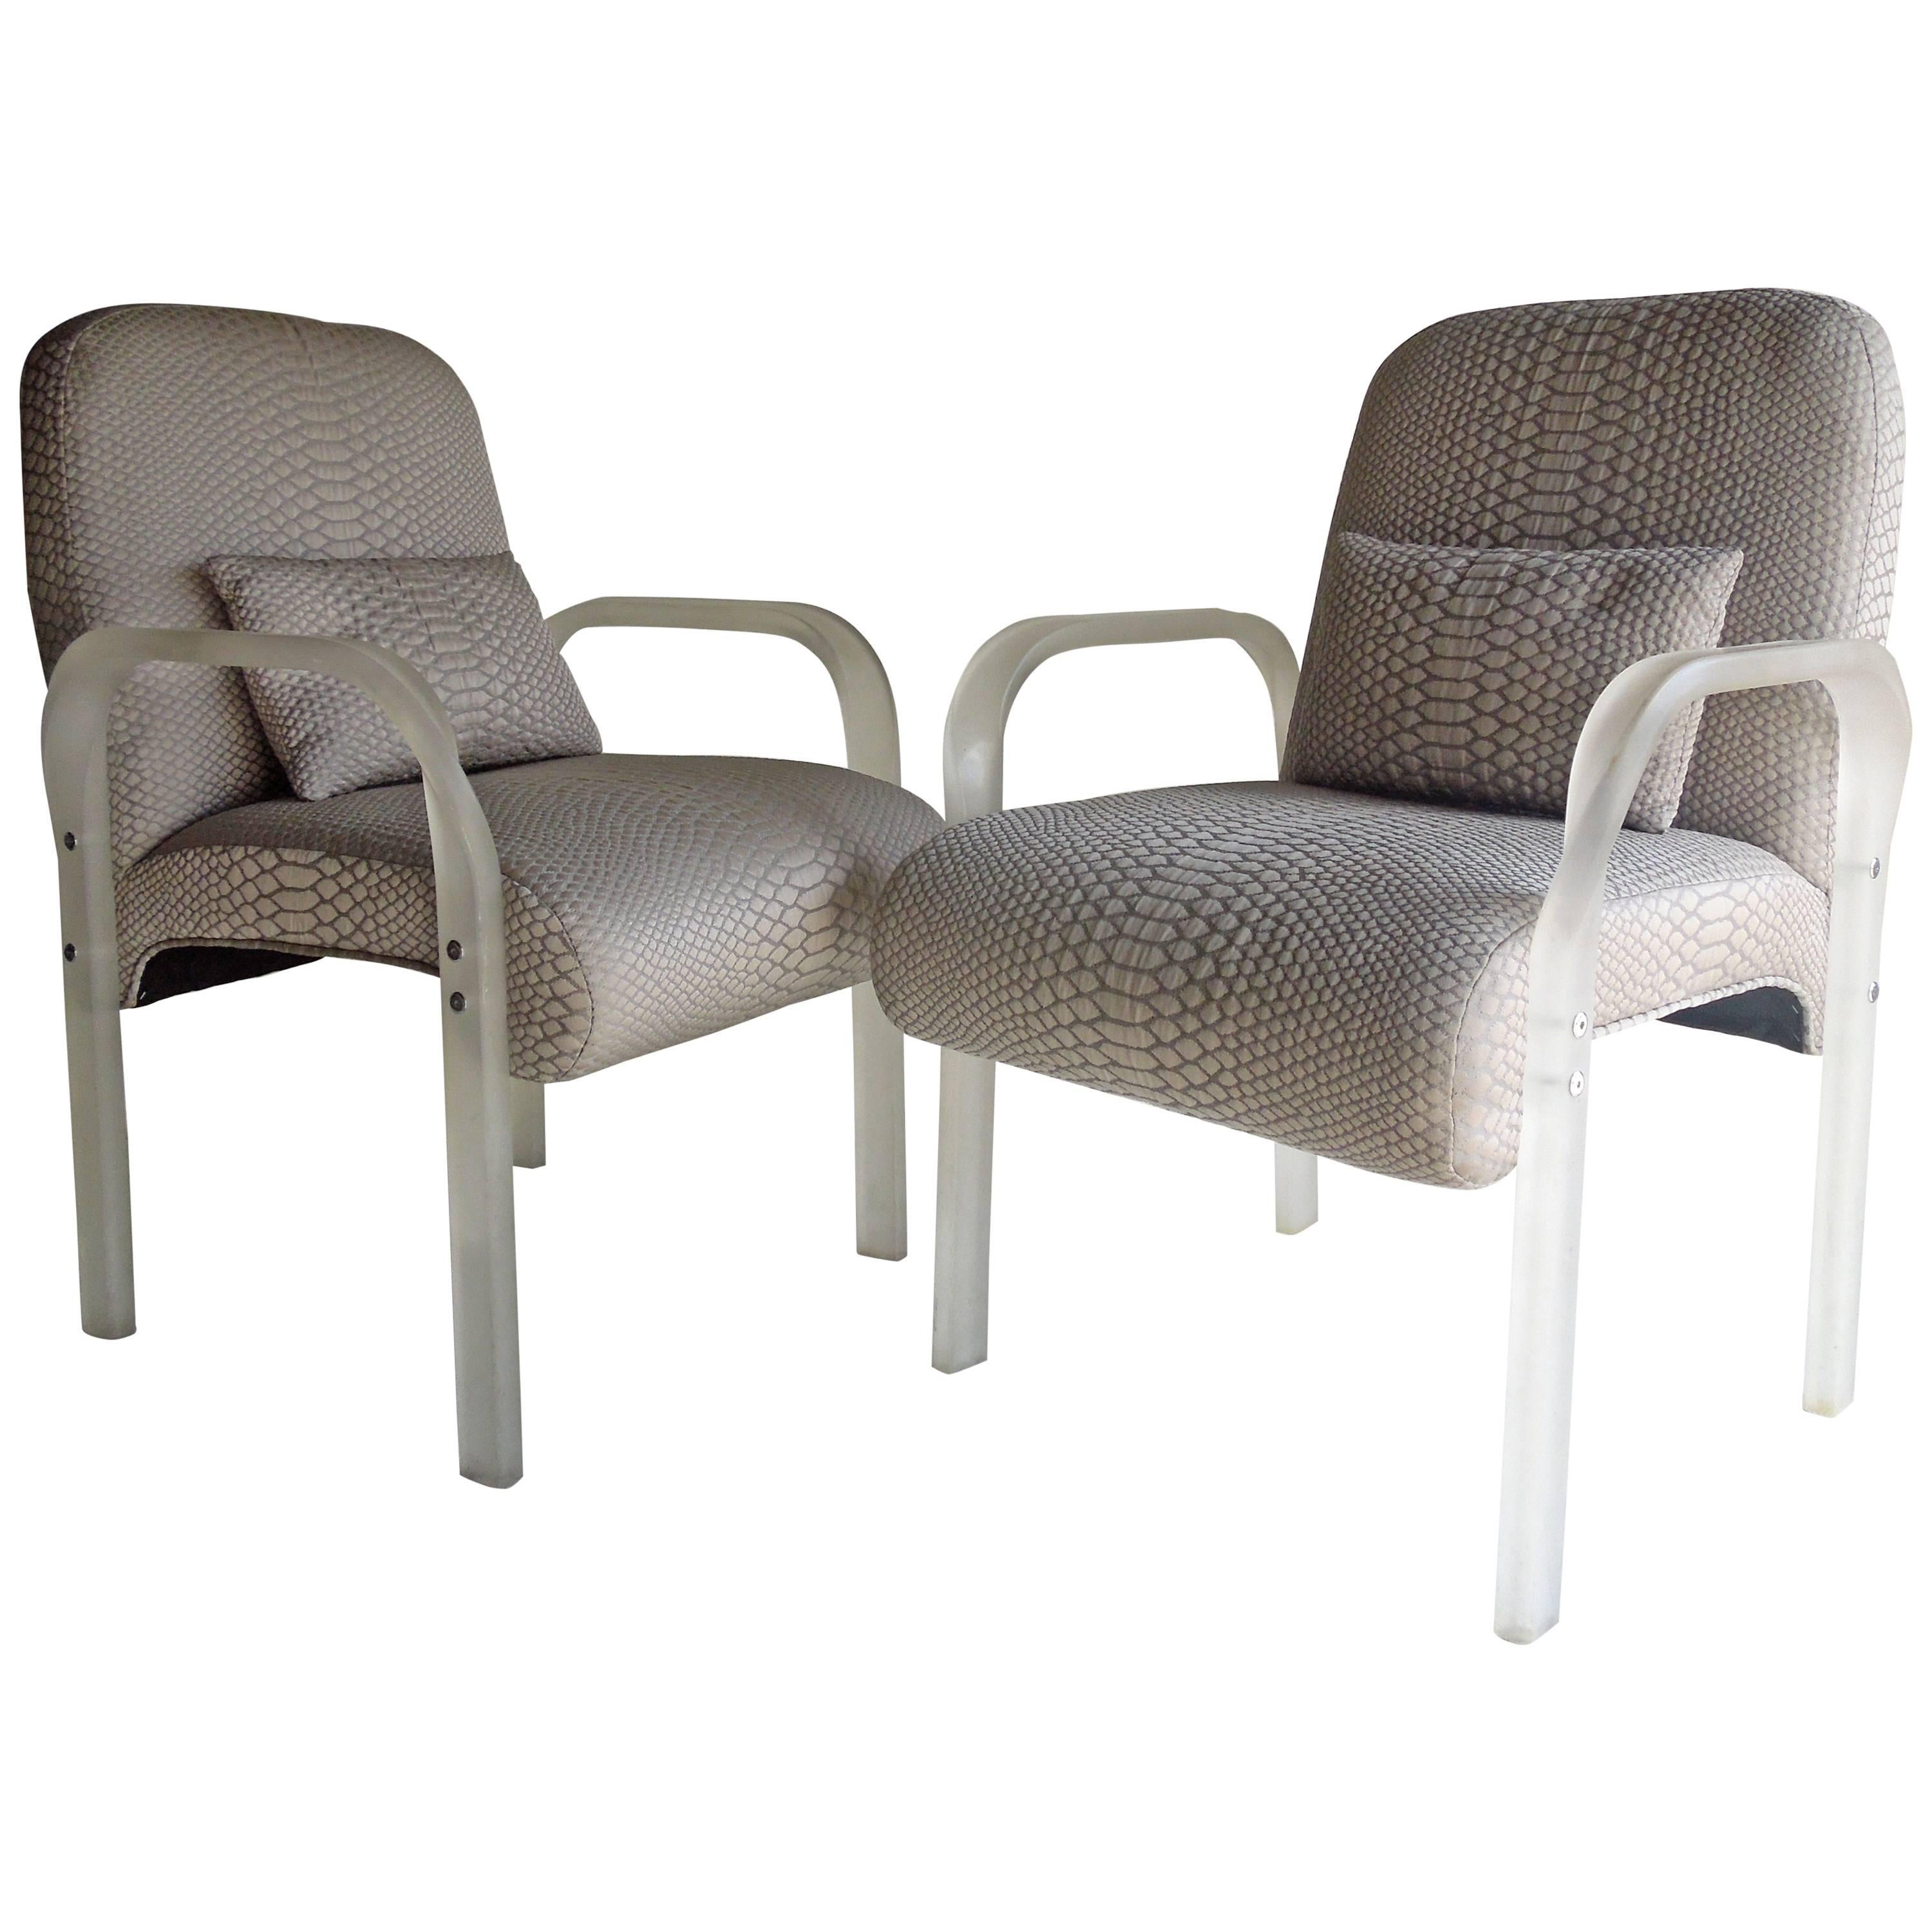 Pair of 70s Glam Vintage Modern Frosted Lucite Armchairs